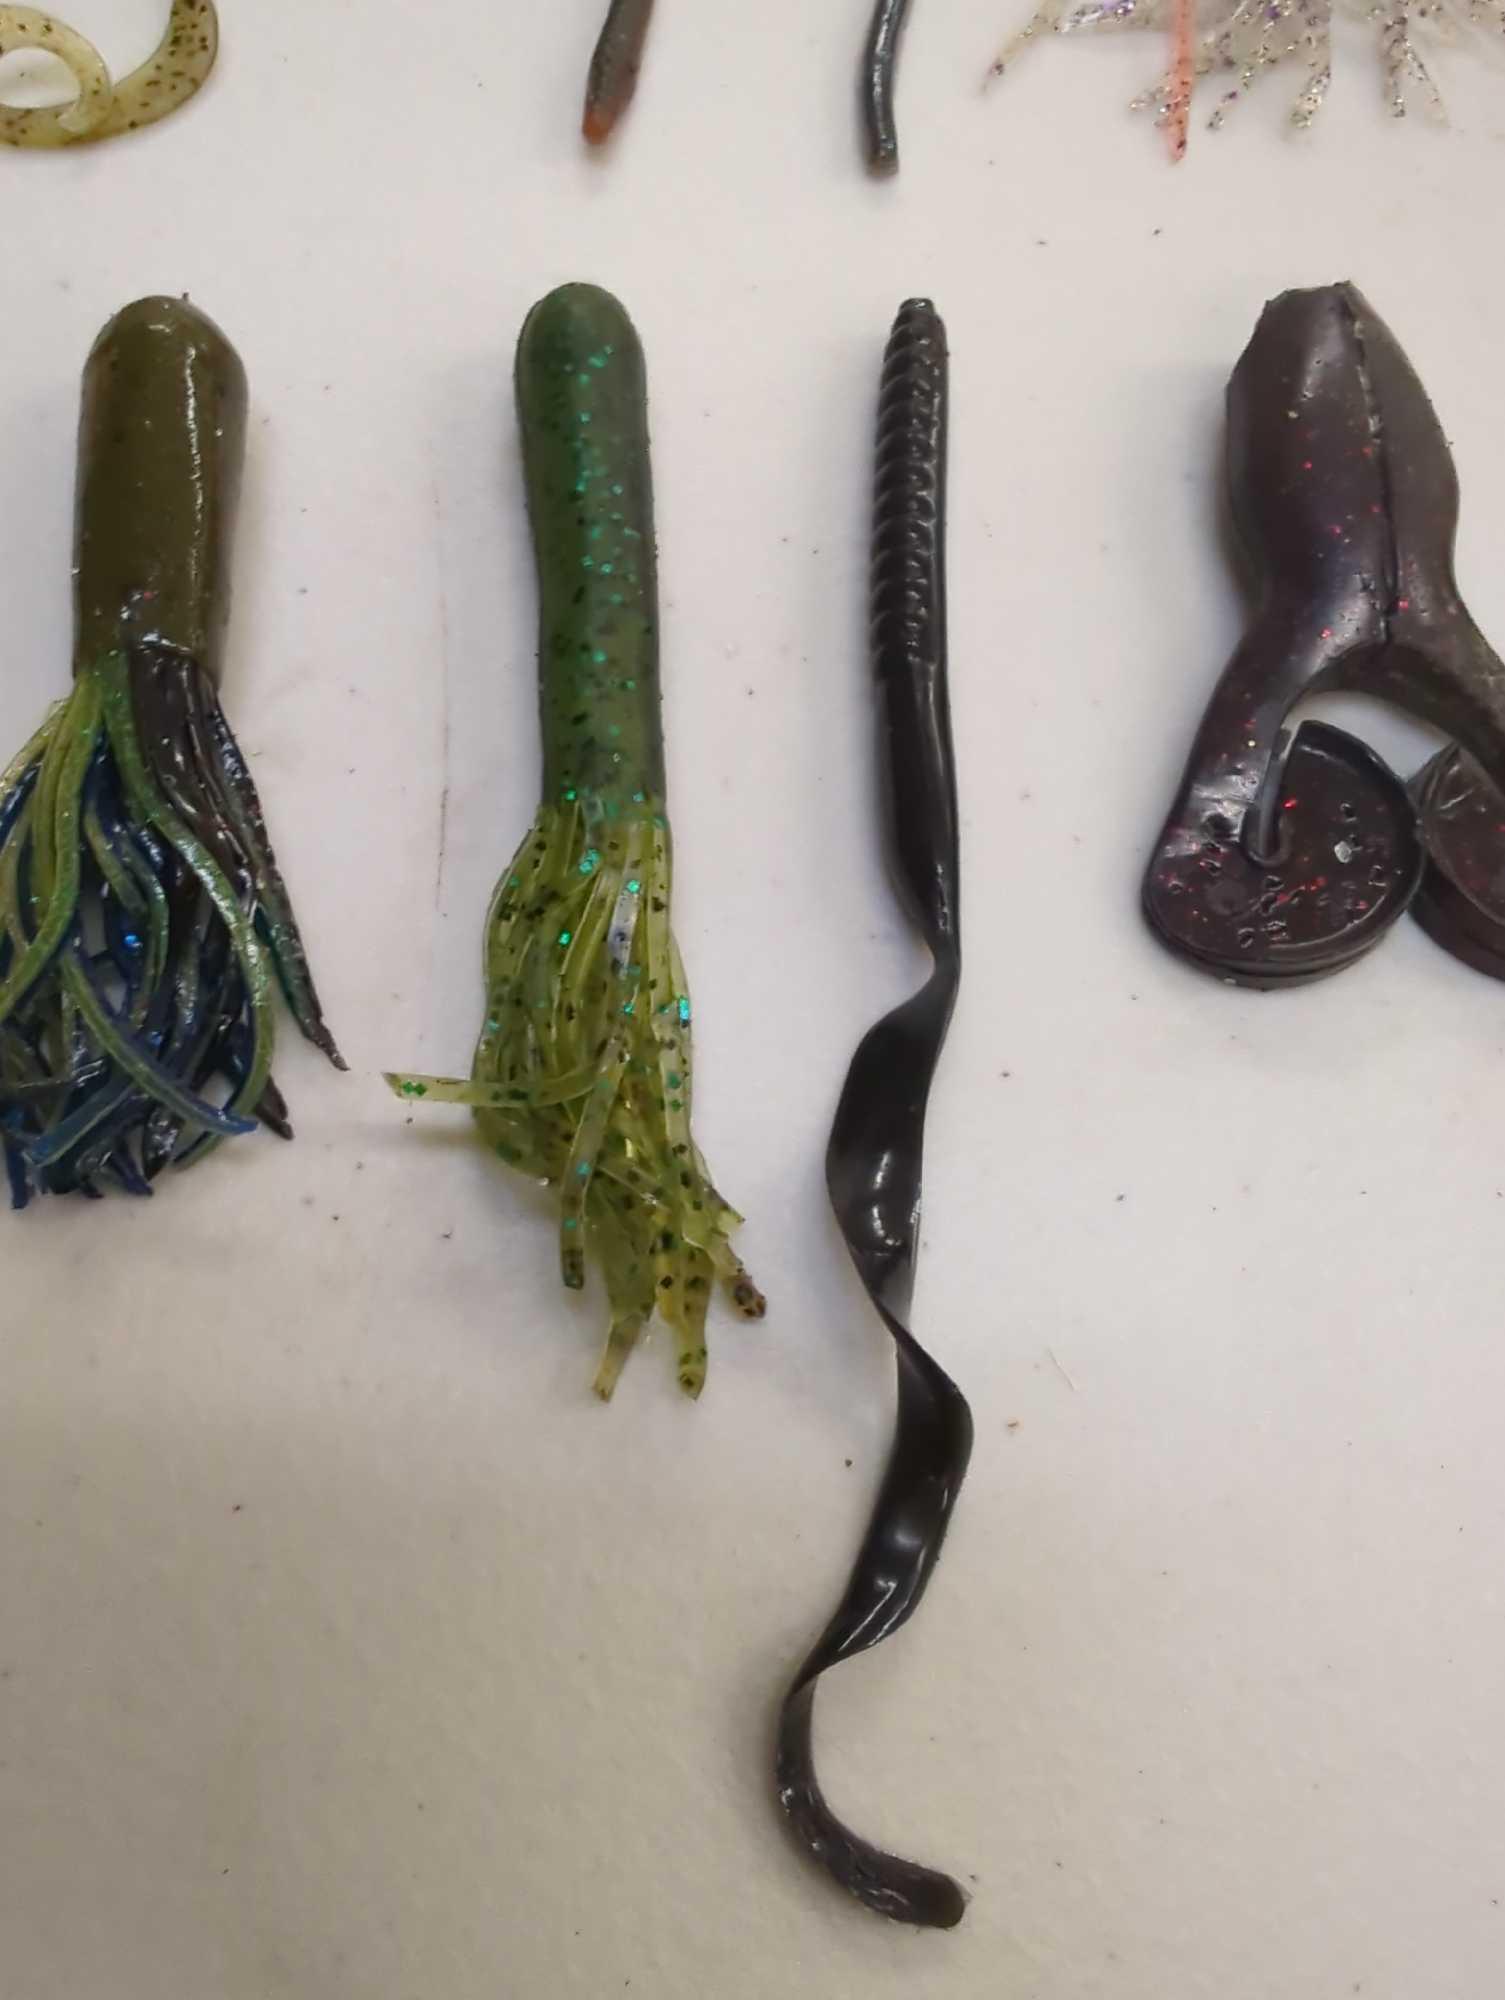 Tackle Box and contents including various fishing worms of similar style. Comes as is shown in